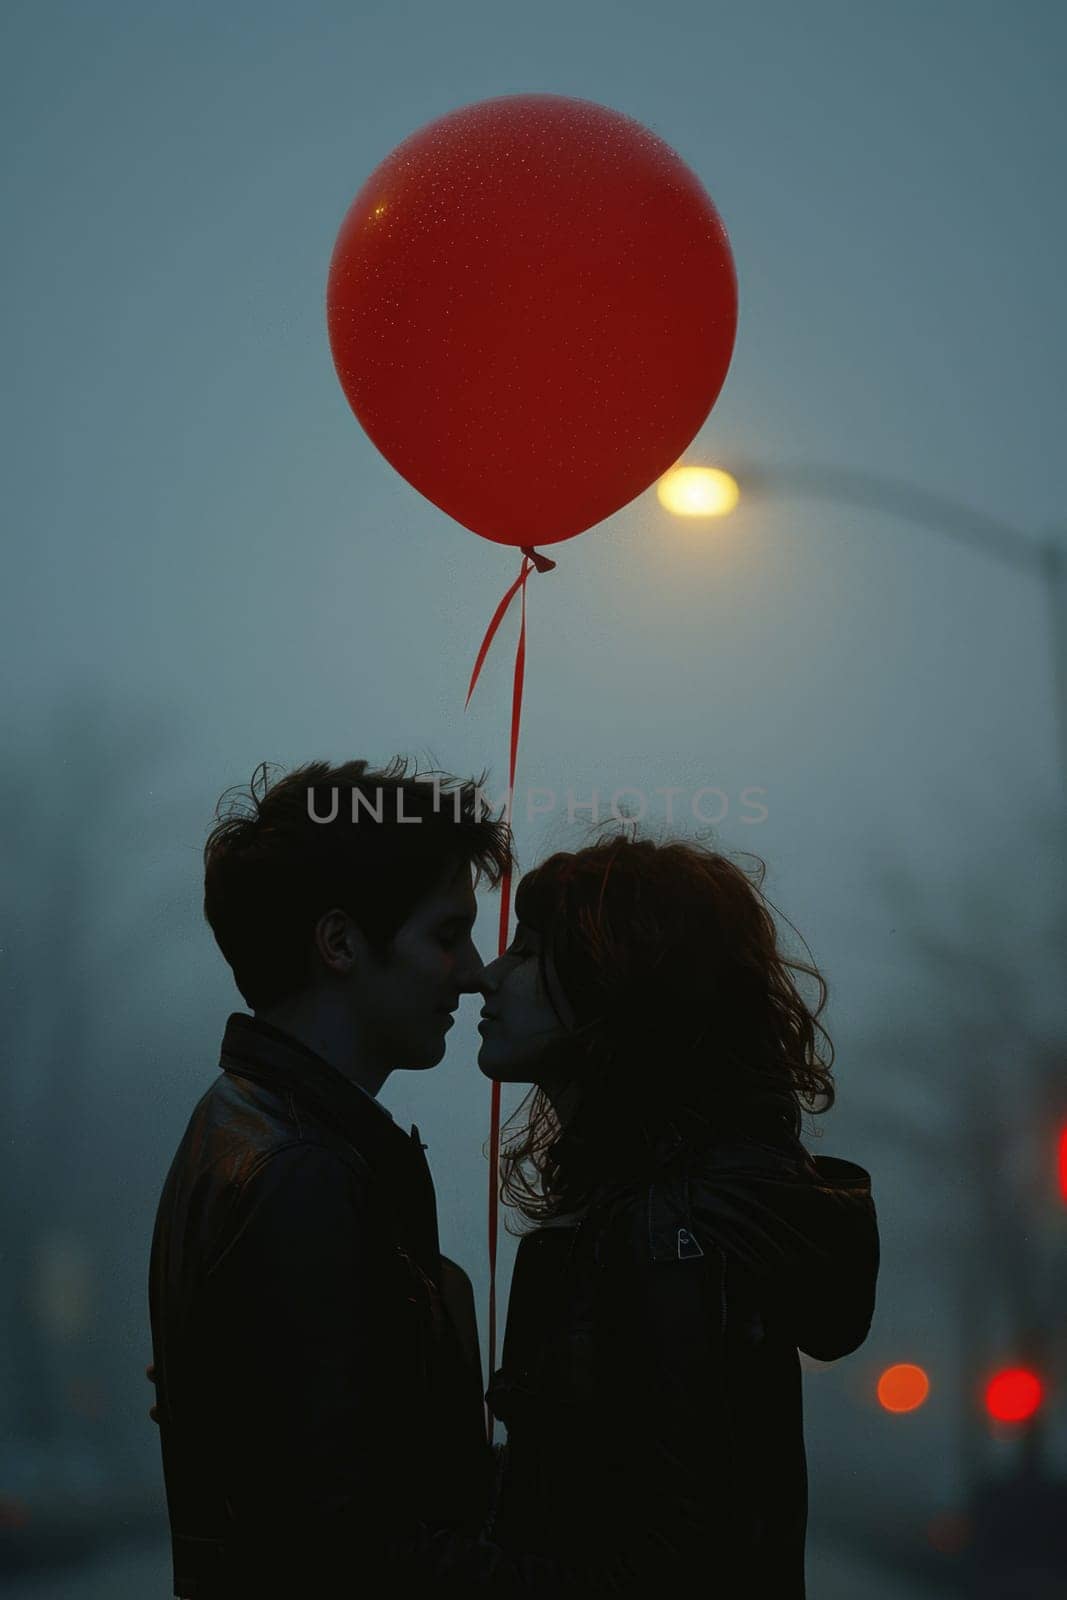 Man and Woman Kissing Under Red Balloon by but_photo